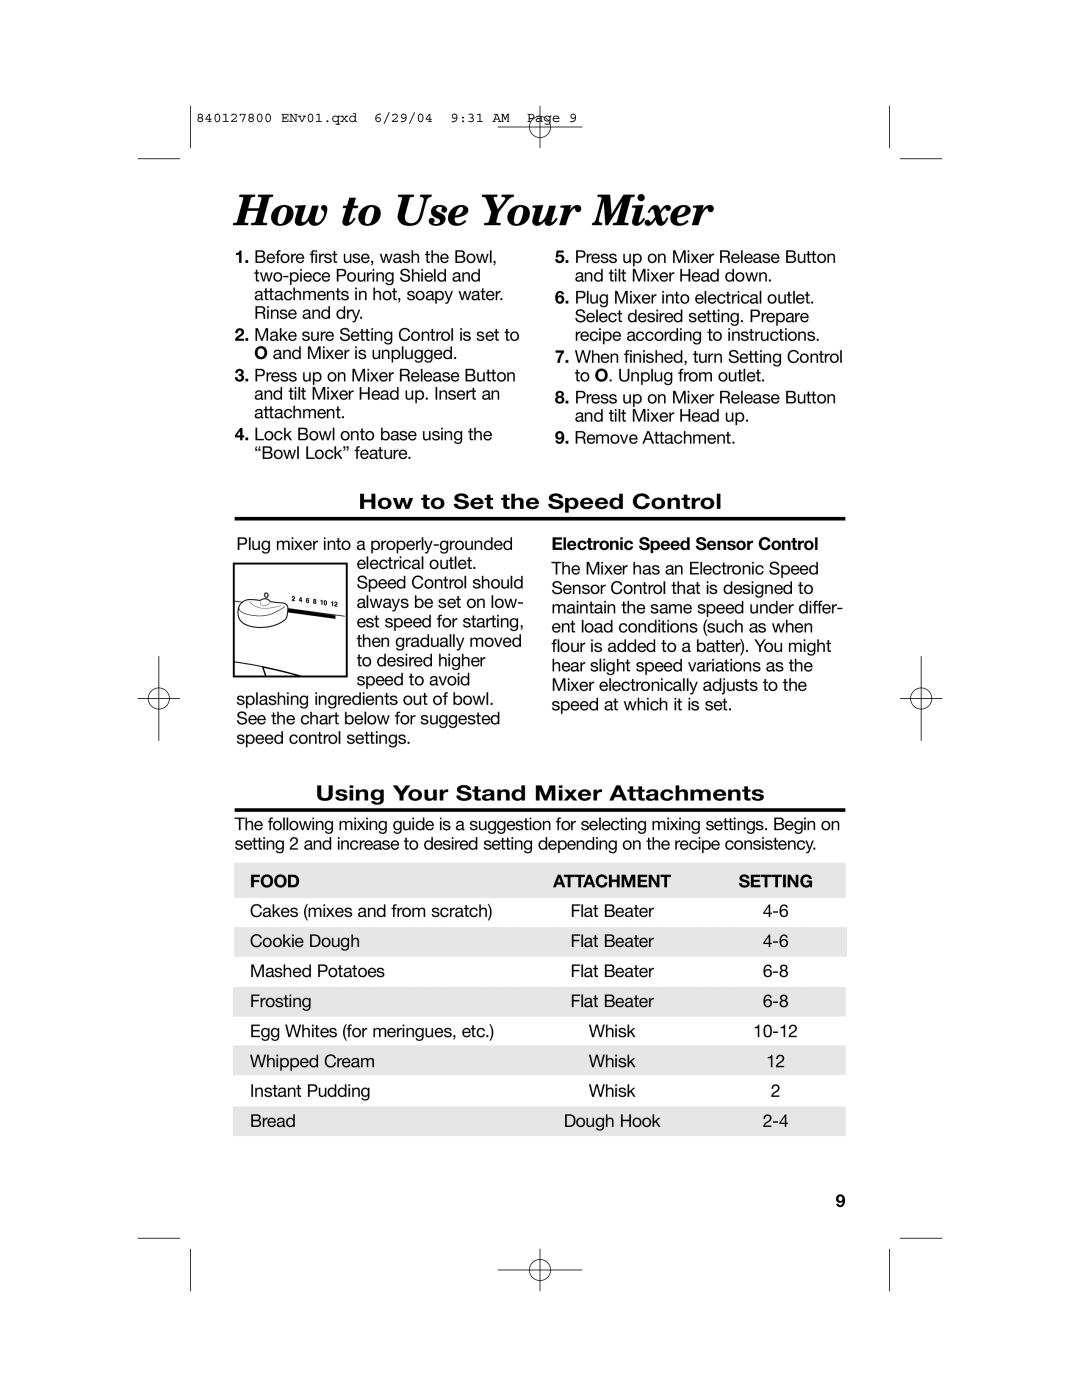 Hamilton Beach 63225 manual How to Use Your Mixer, How to Set the Speed Control, Using Your Stand Mixer Attachments, Food 